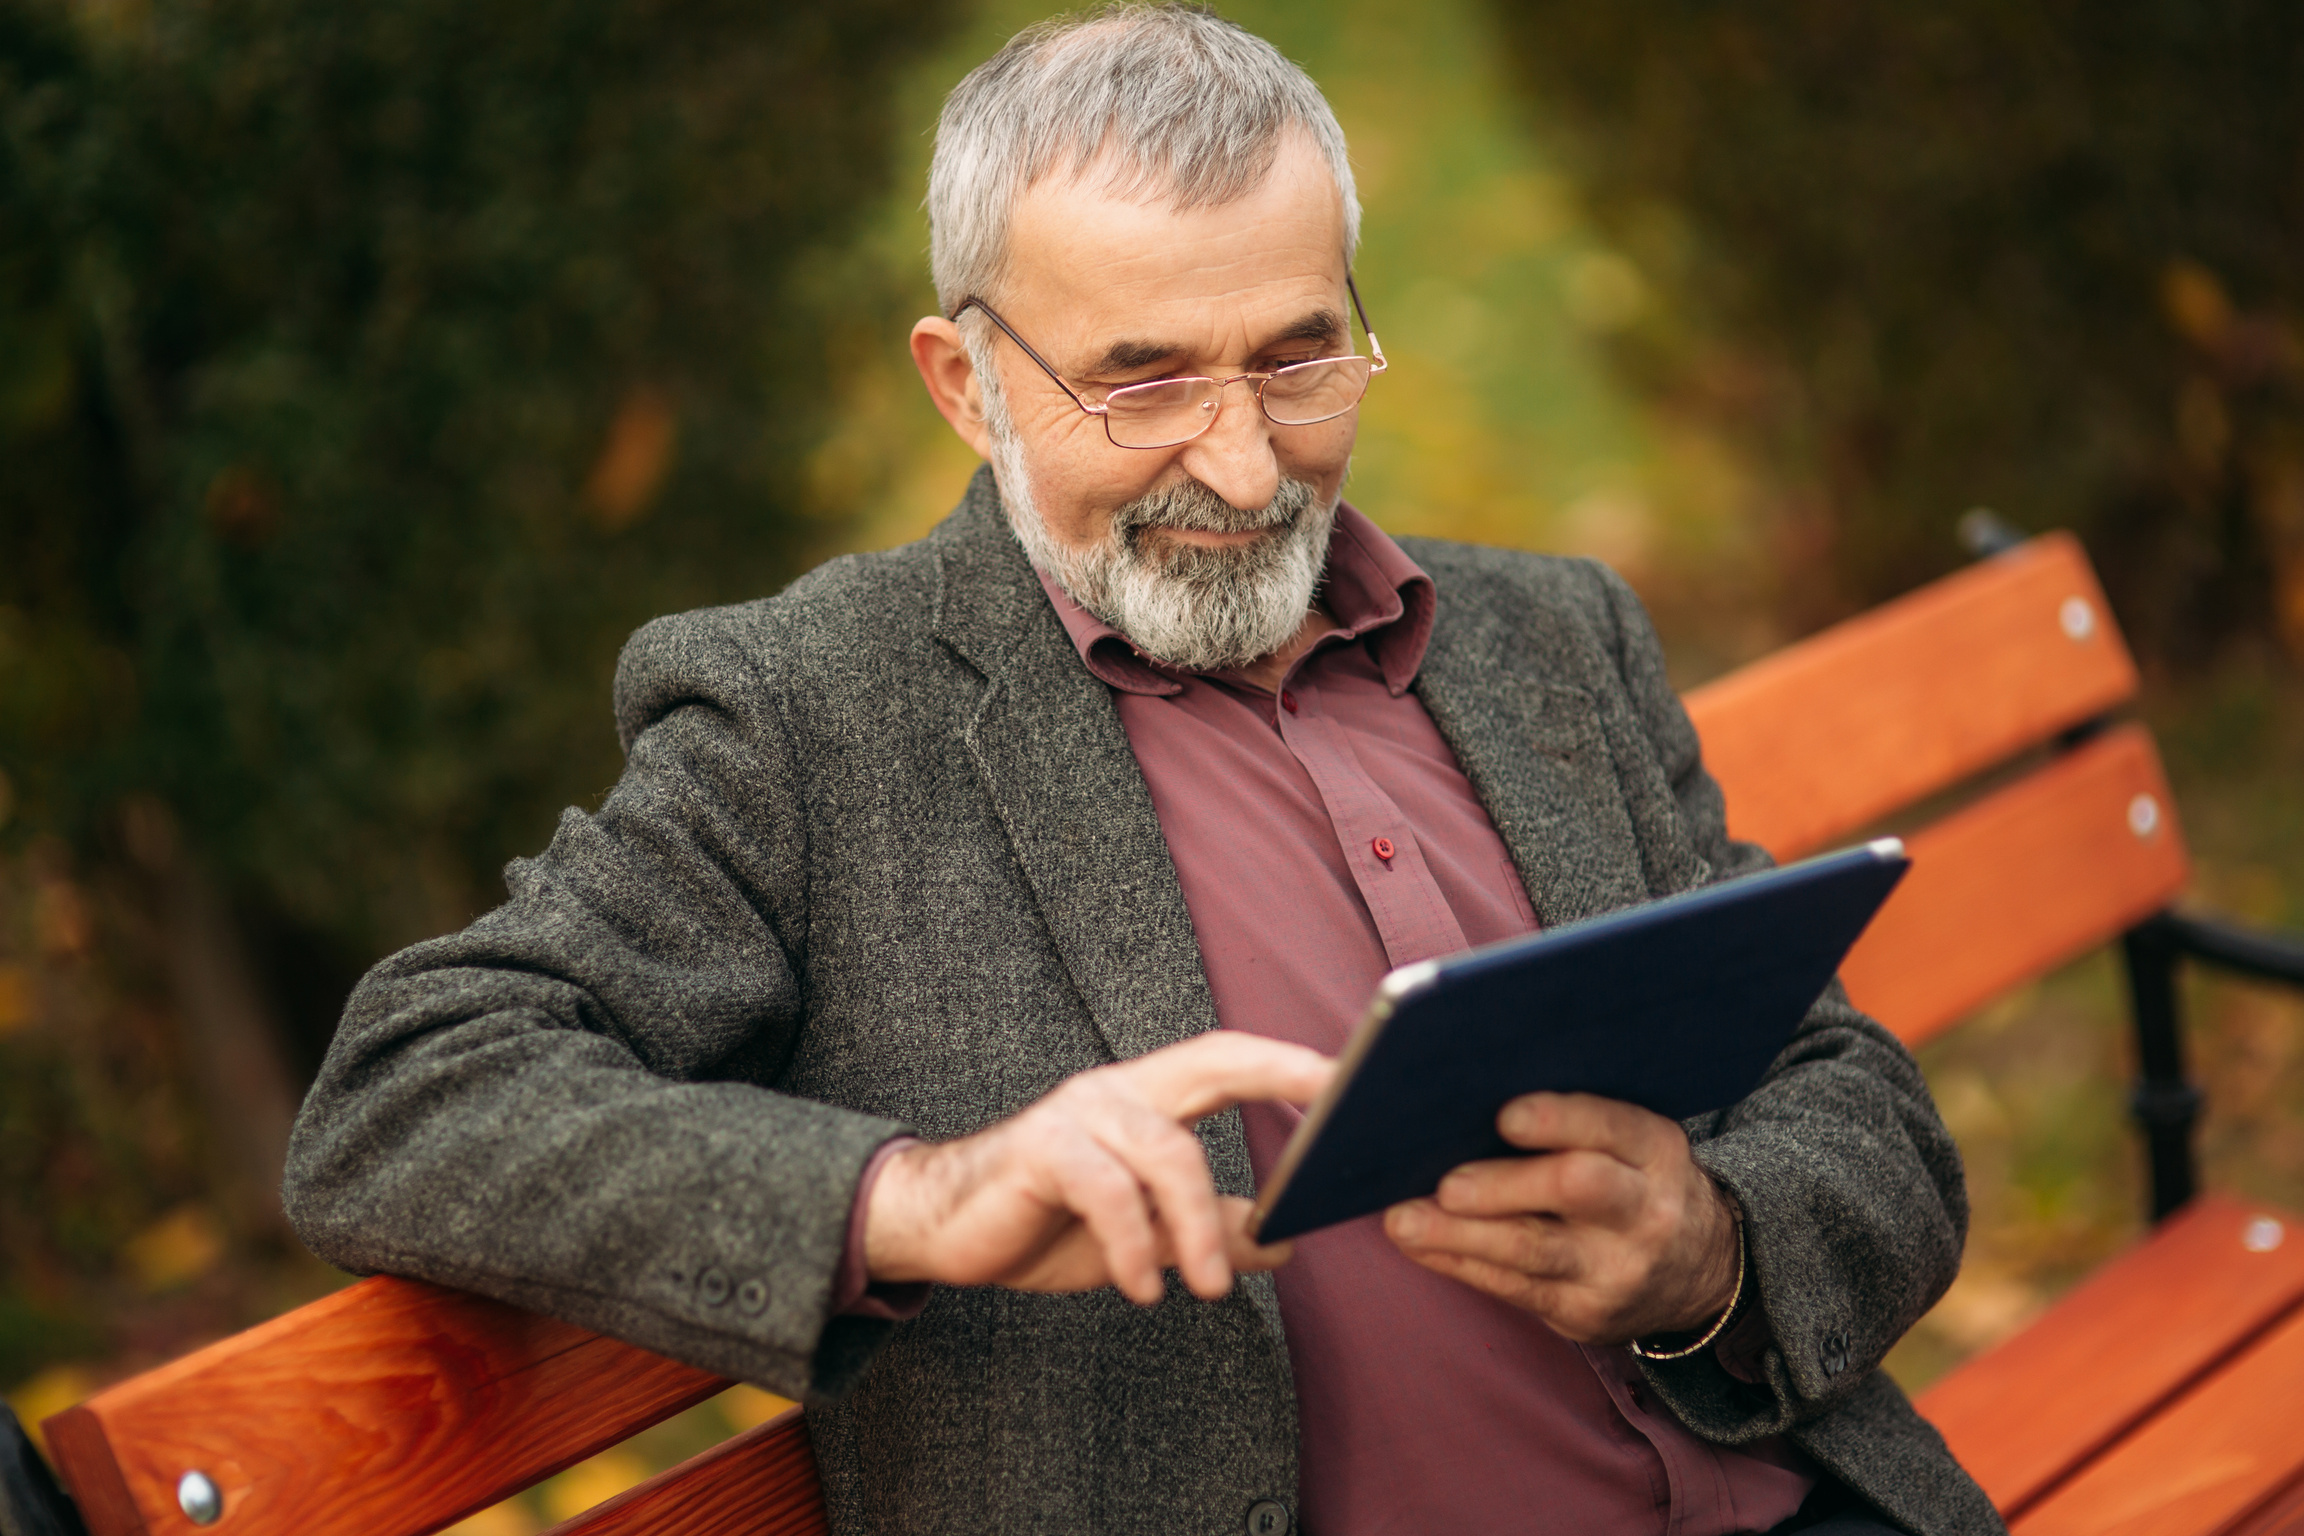 Grandpa Using Tablet in the Park 